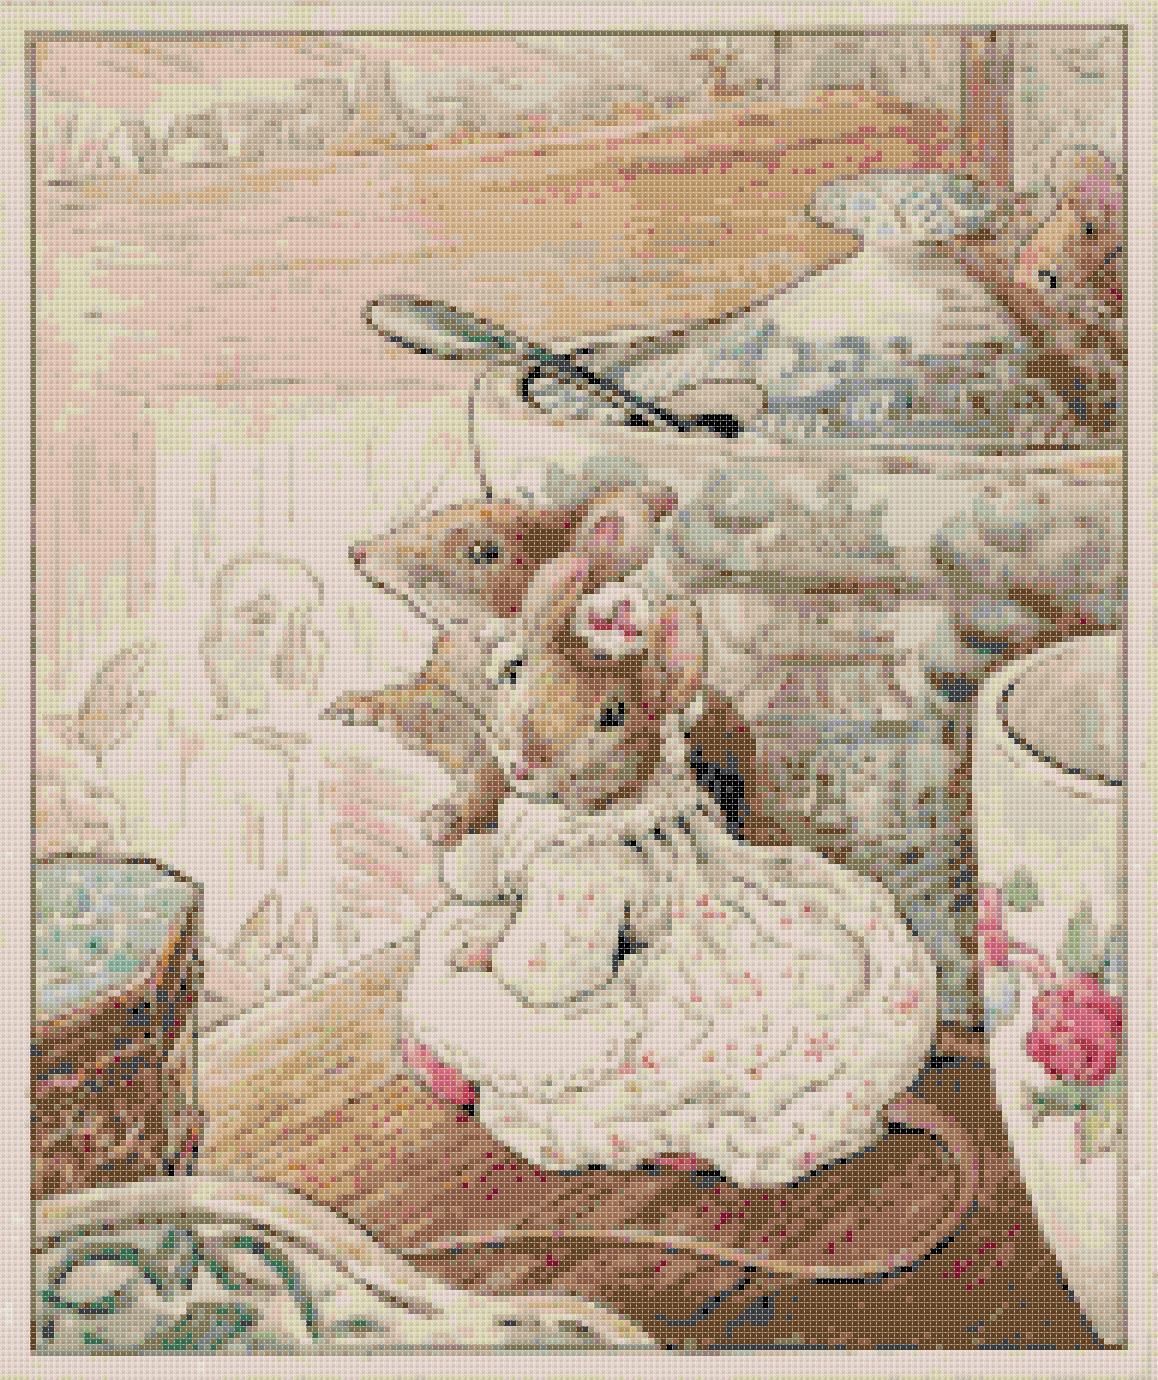 Counted Cross Stitch  B. potter's two mice married 13.79" x 16.43"  L1143 - $3.99